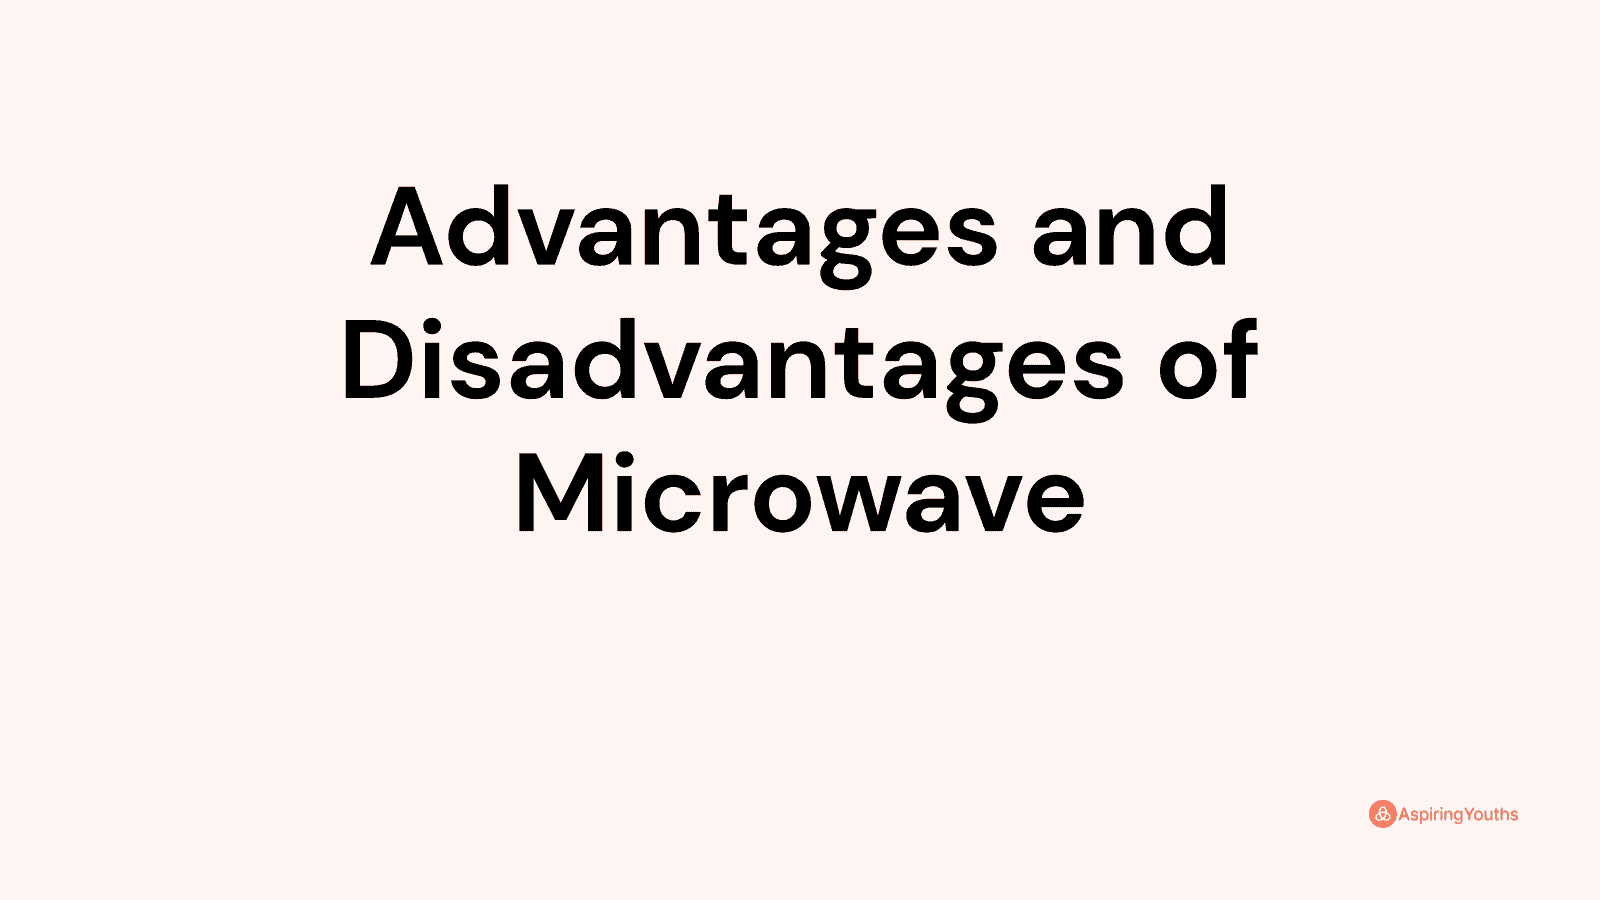 Advantages and disadvantages of Microwave